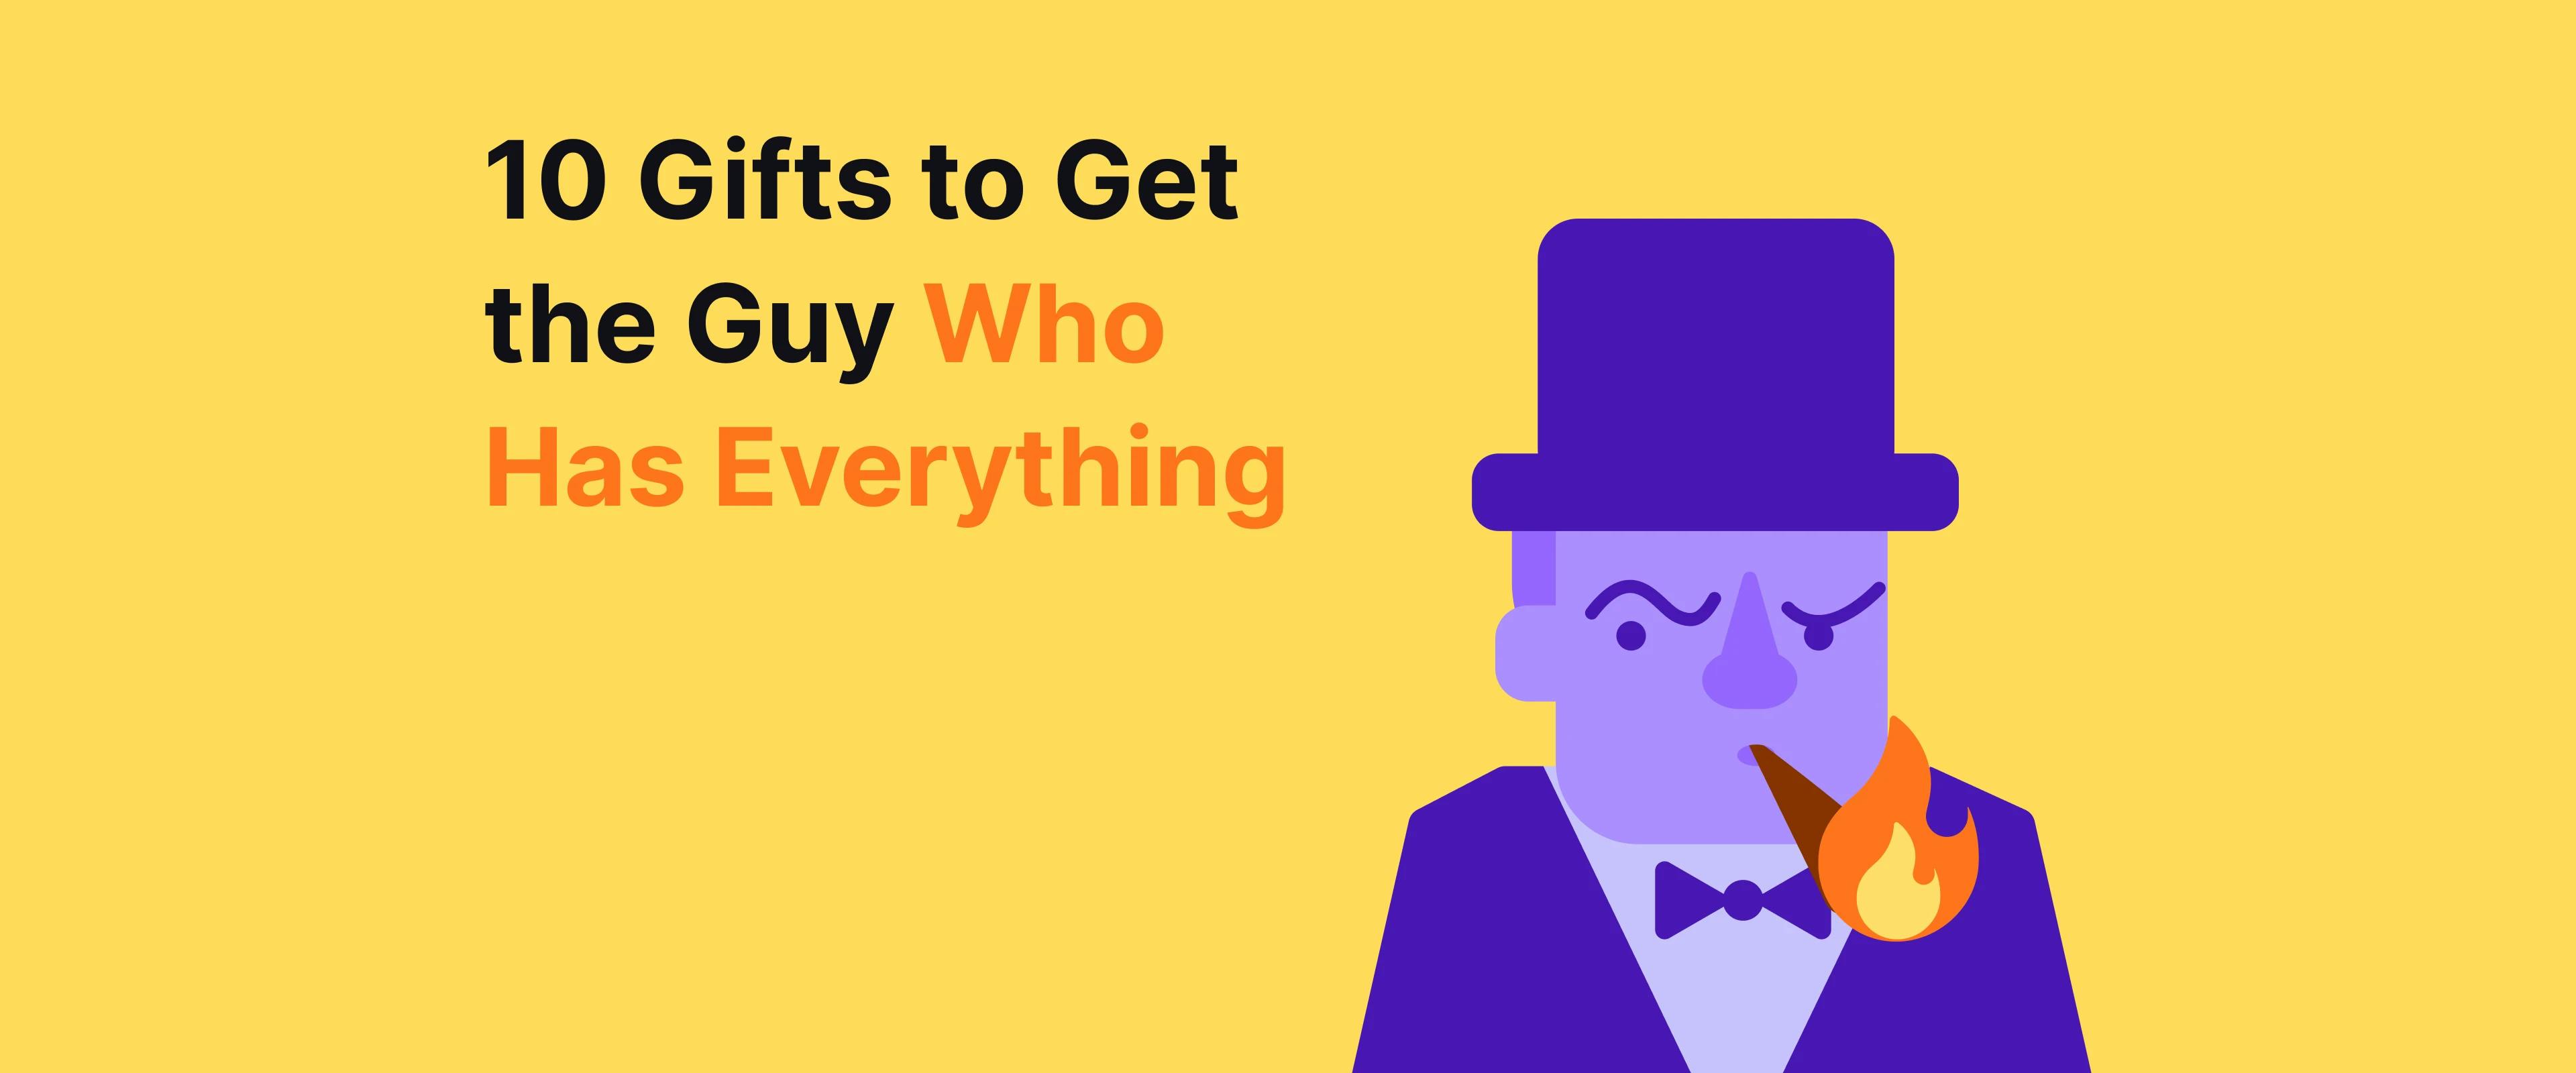 10_gifts_to_get_the_guy_who_has_everything